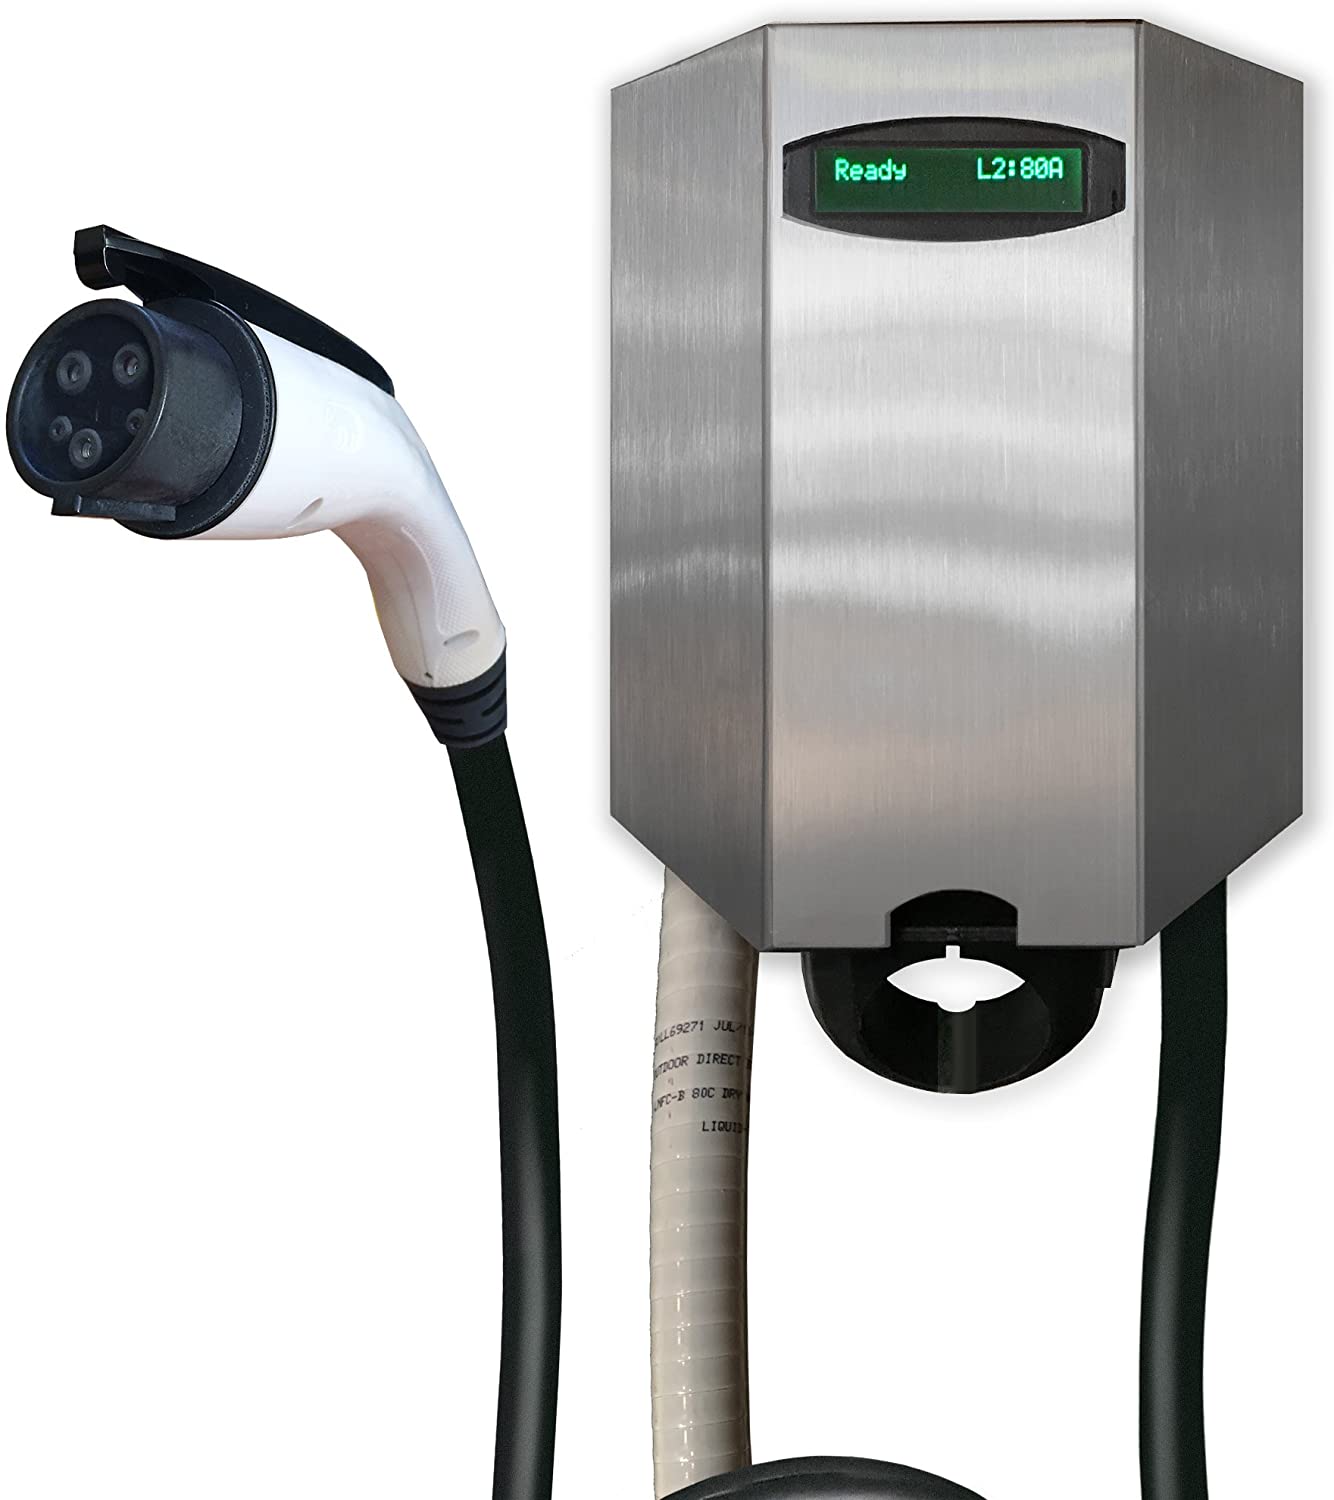 Buy Wall Wattz: EVSE, Level 2, 75 Amp Output, 25' J1772 charging cable w/ Cable Management System, Satin finish, Type 4X outdoor enclosure